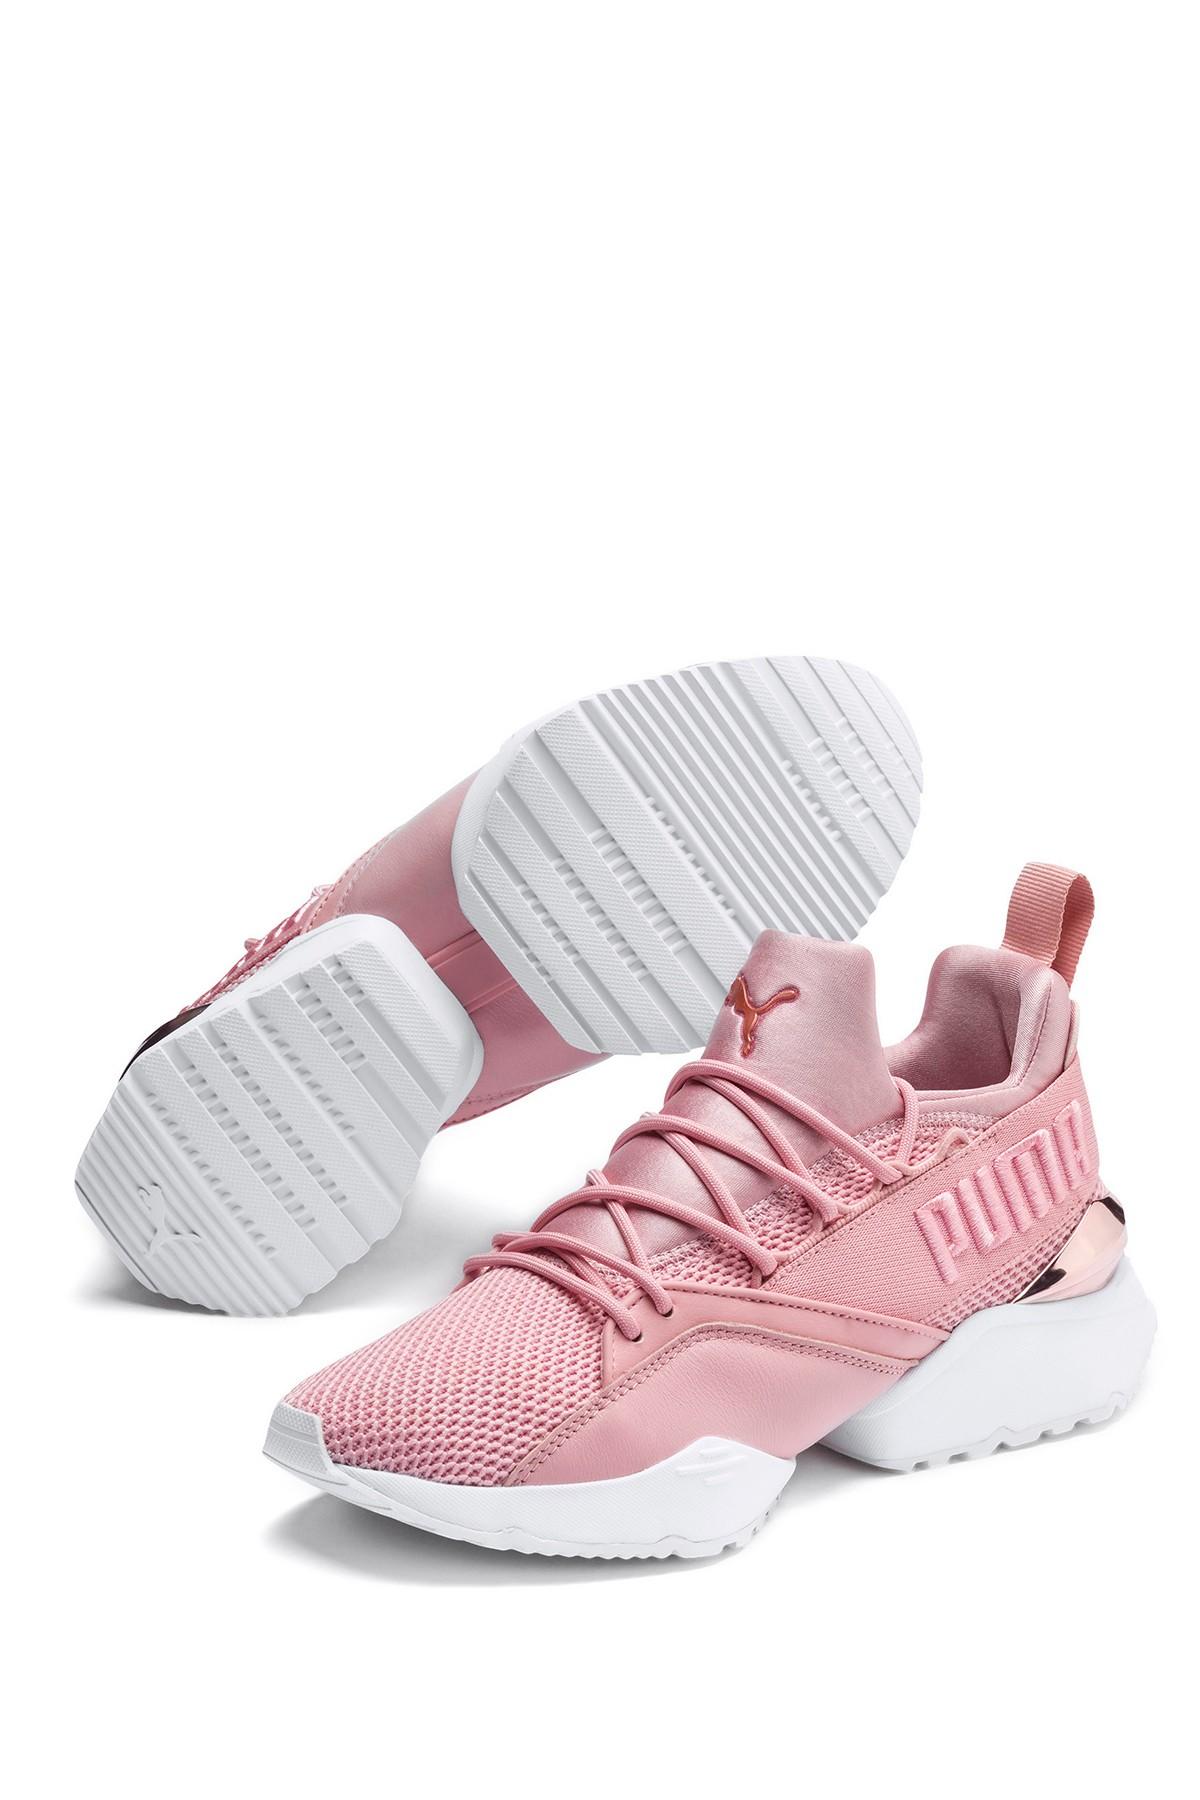 PUMA Muse Maia Metallic Sneakers in Pink - Lyst